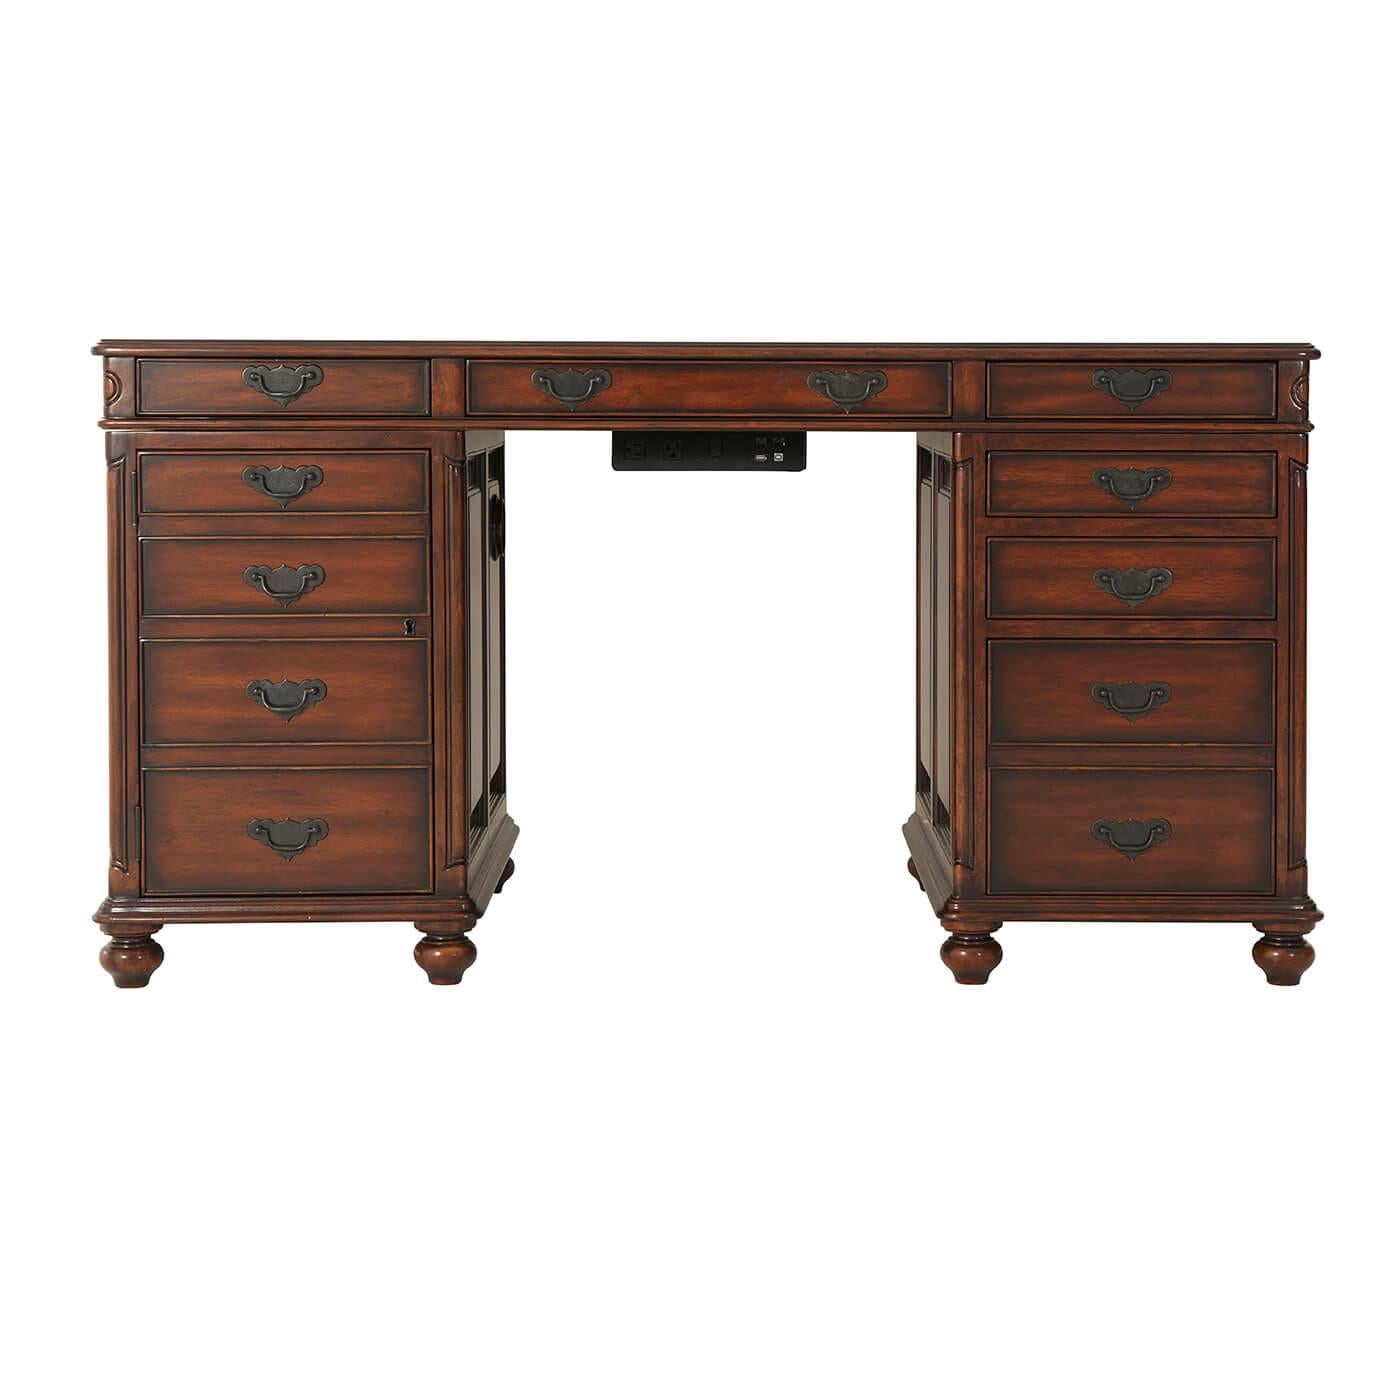 An English Edwardian style hand carved pedestal desk, with a leather inset top, three frieze drawers, one pedestal with cupboard the other with two drawers and a filing drawer. 

Dimensions: 58